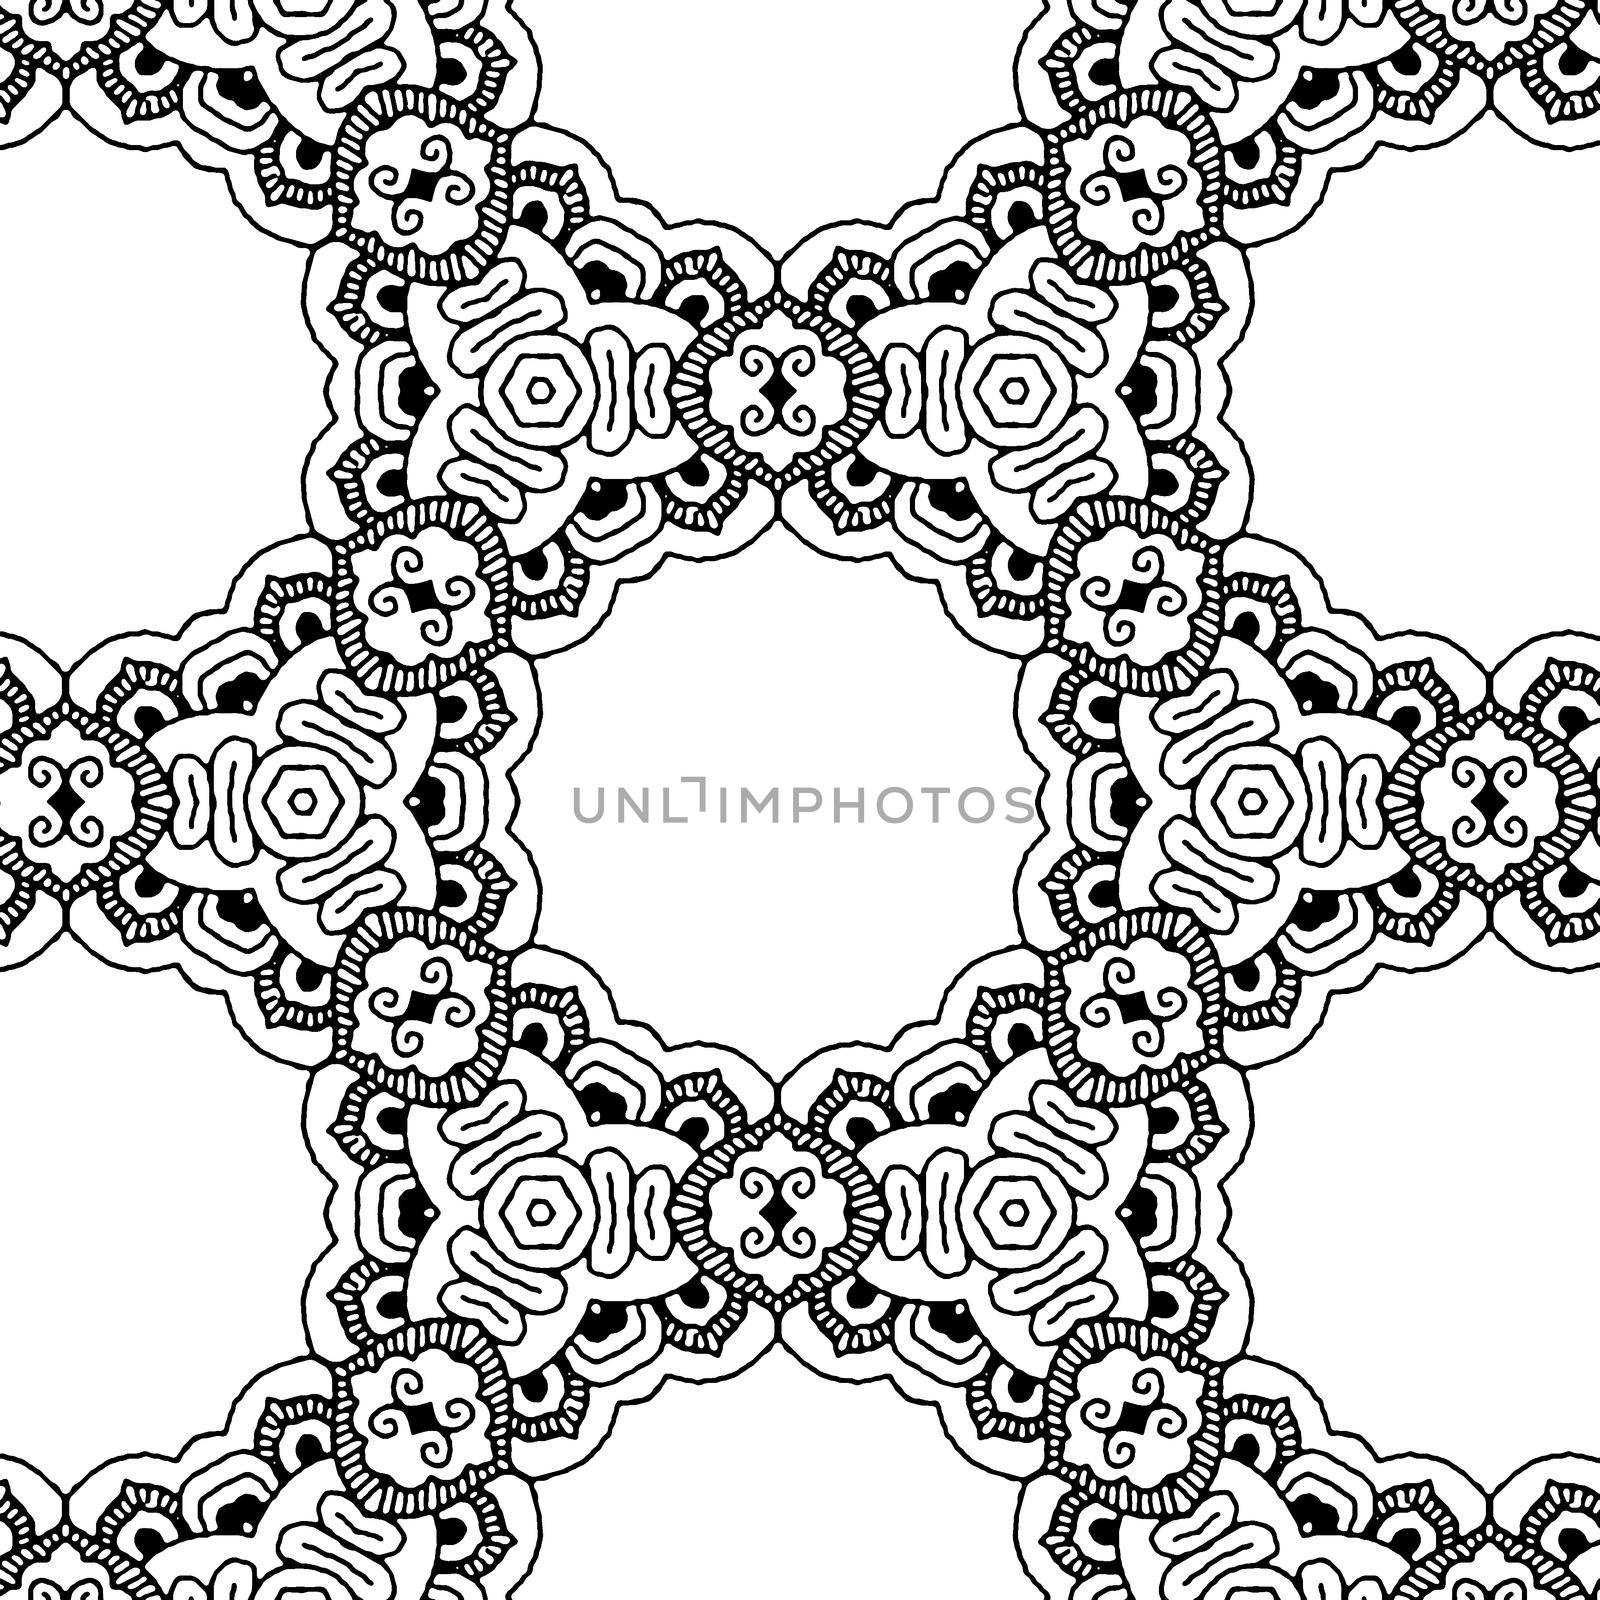 Beautiful and elegant monochromatic and grey symmetrical pattern designs on solid sheet of wallpaper by tabishere